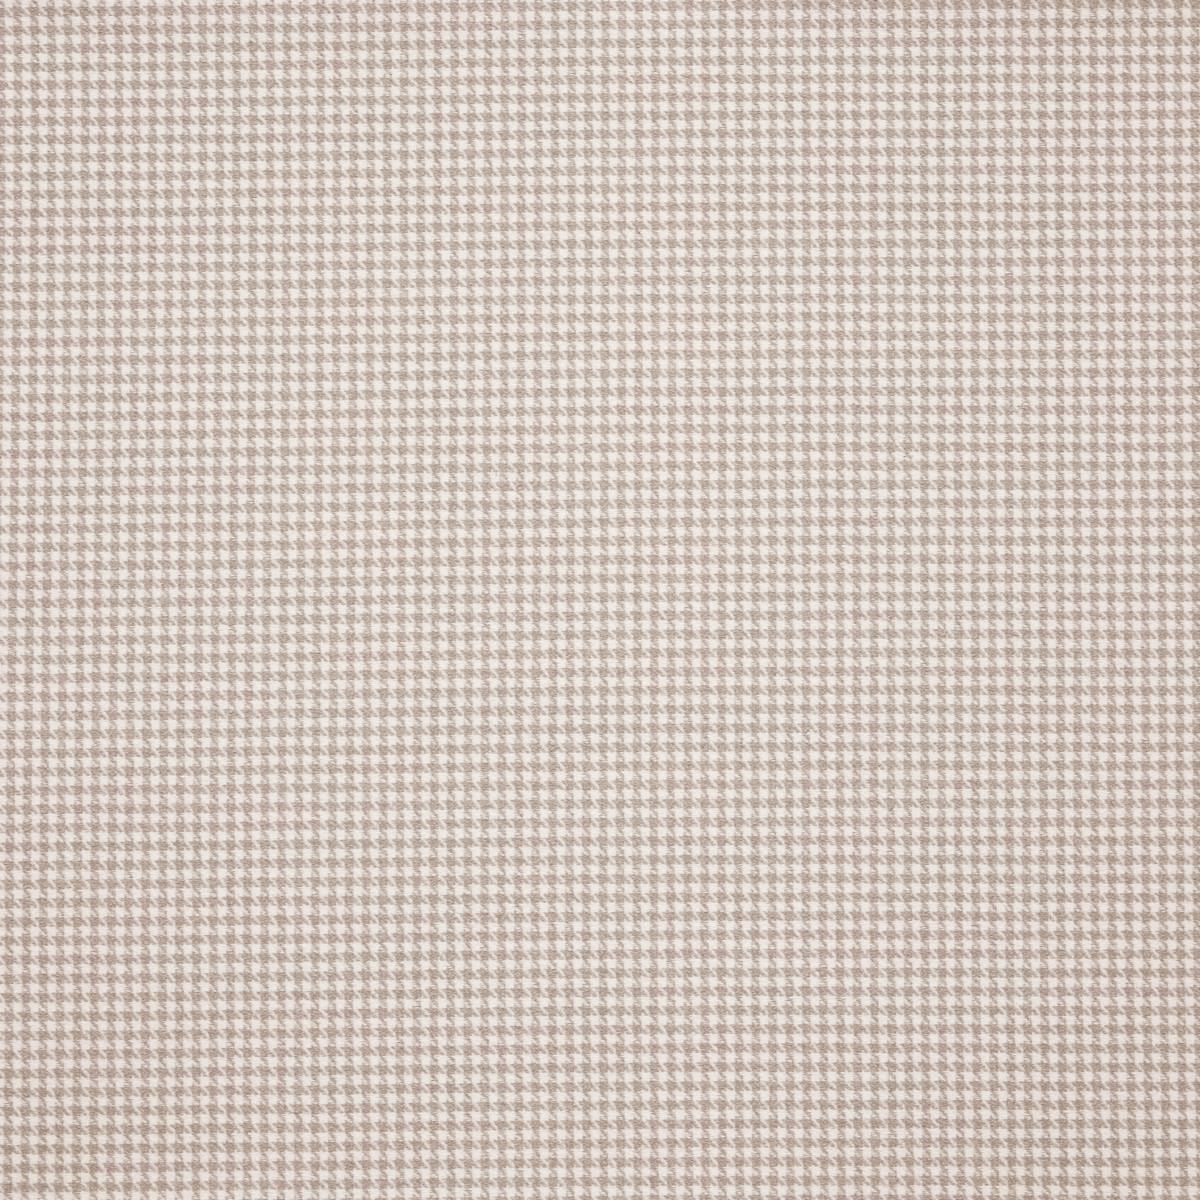 Houndstooth Putty Fabric by iLiv